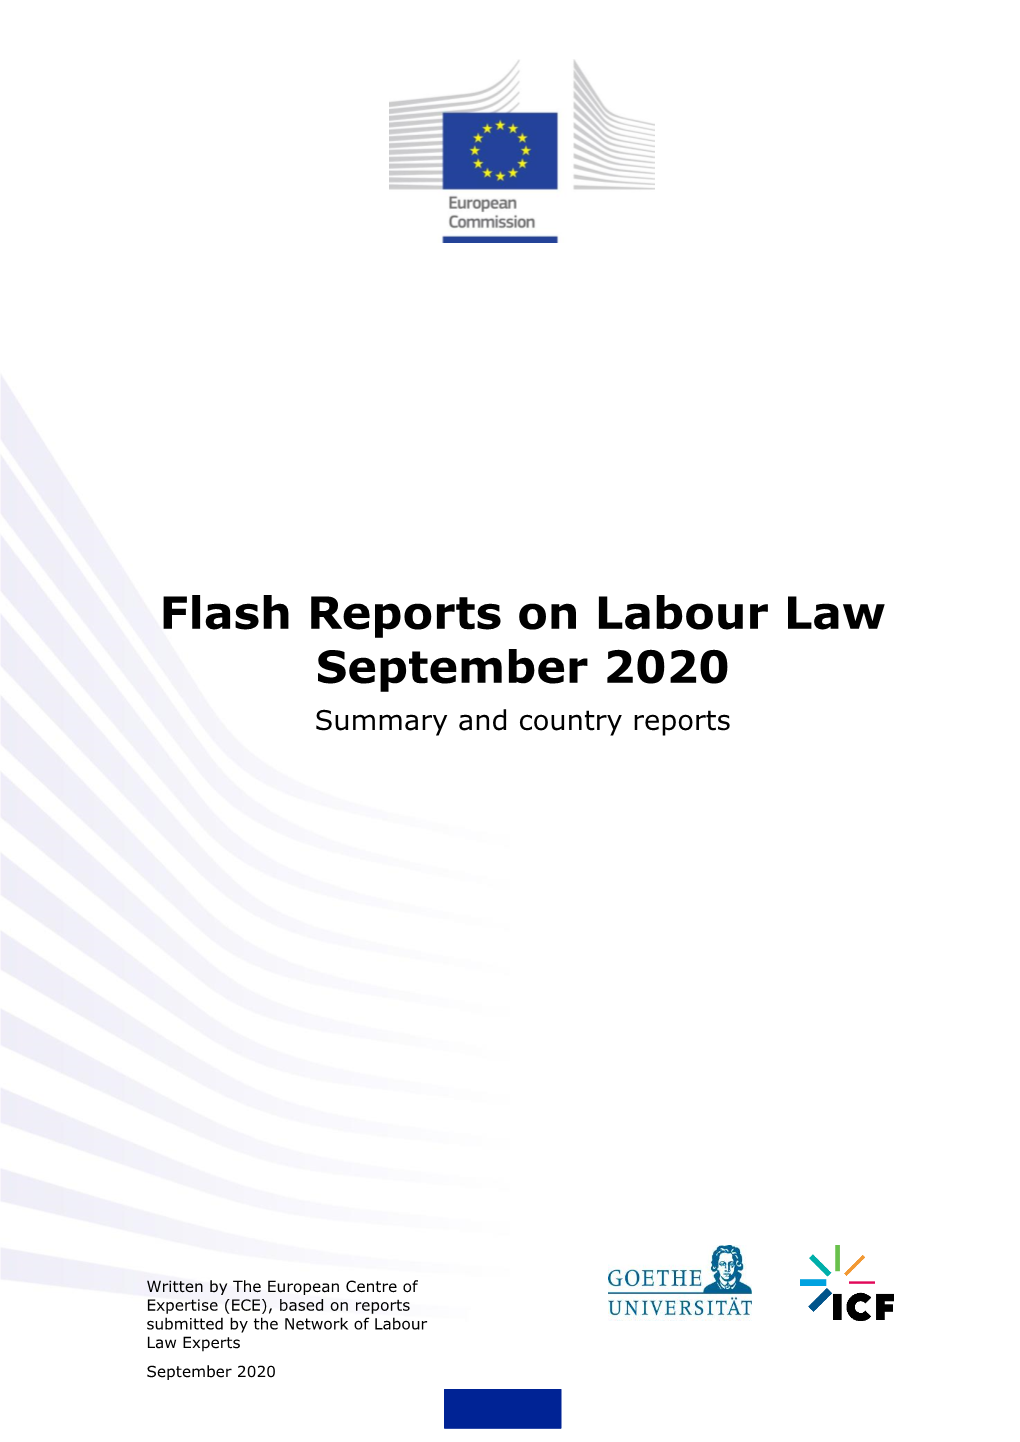 Flash Reports on Labour Law September 2020 Summary and Country Reports